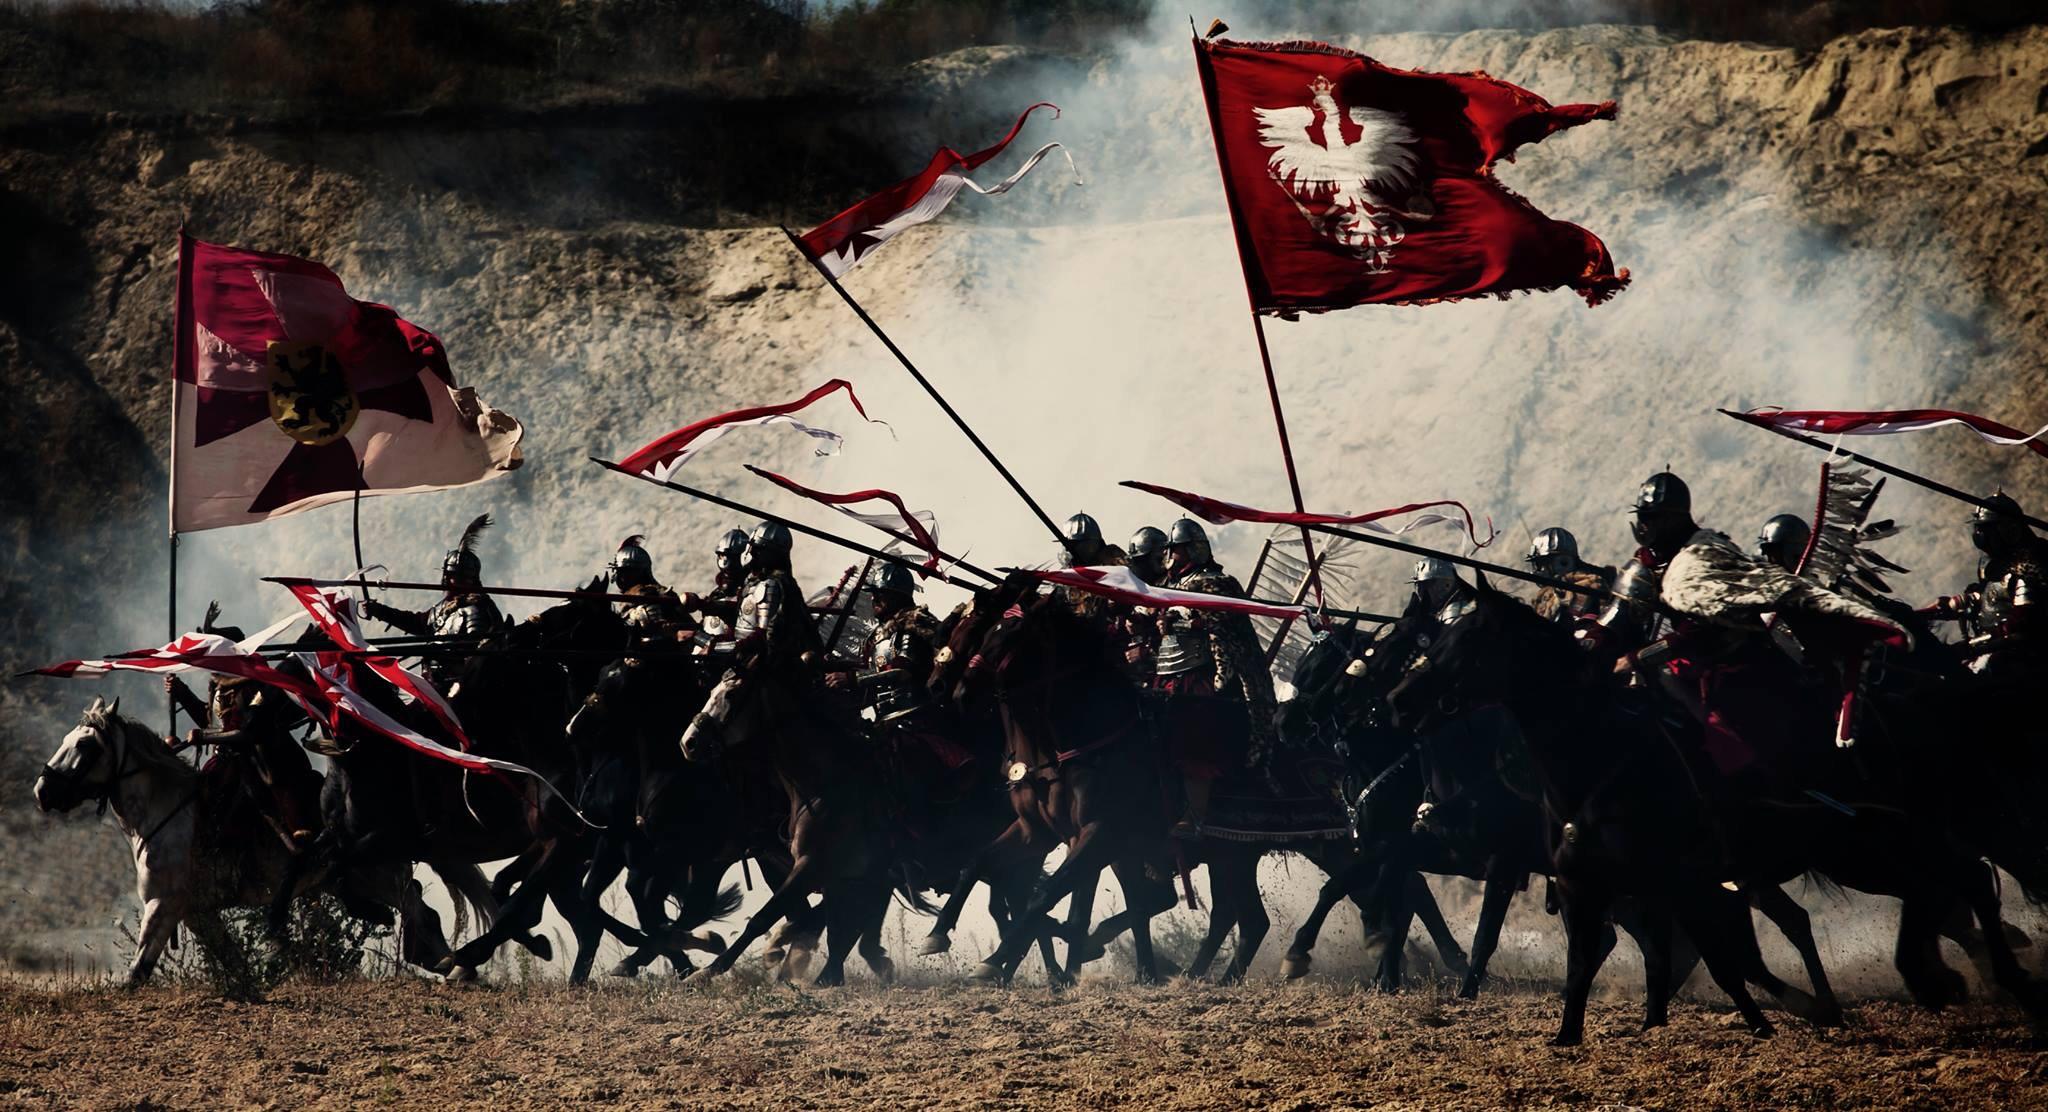 Then the Winged Hussars arrived: wallpaper